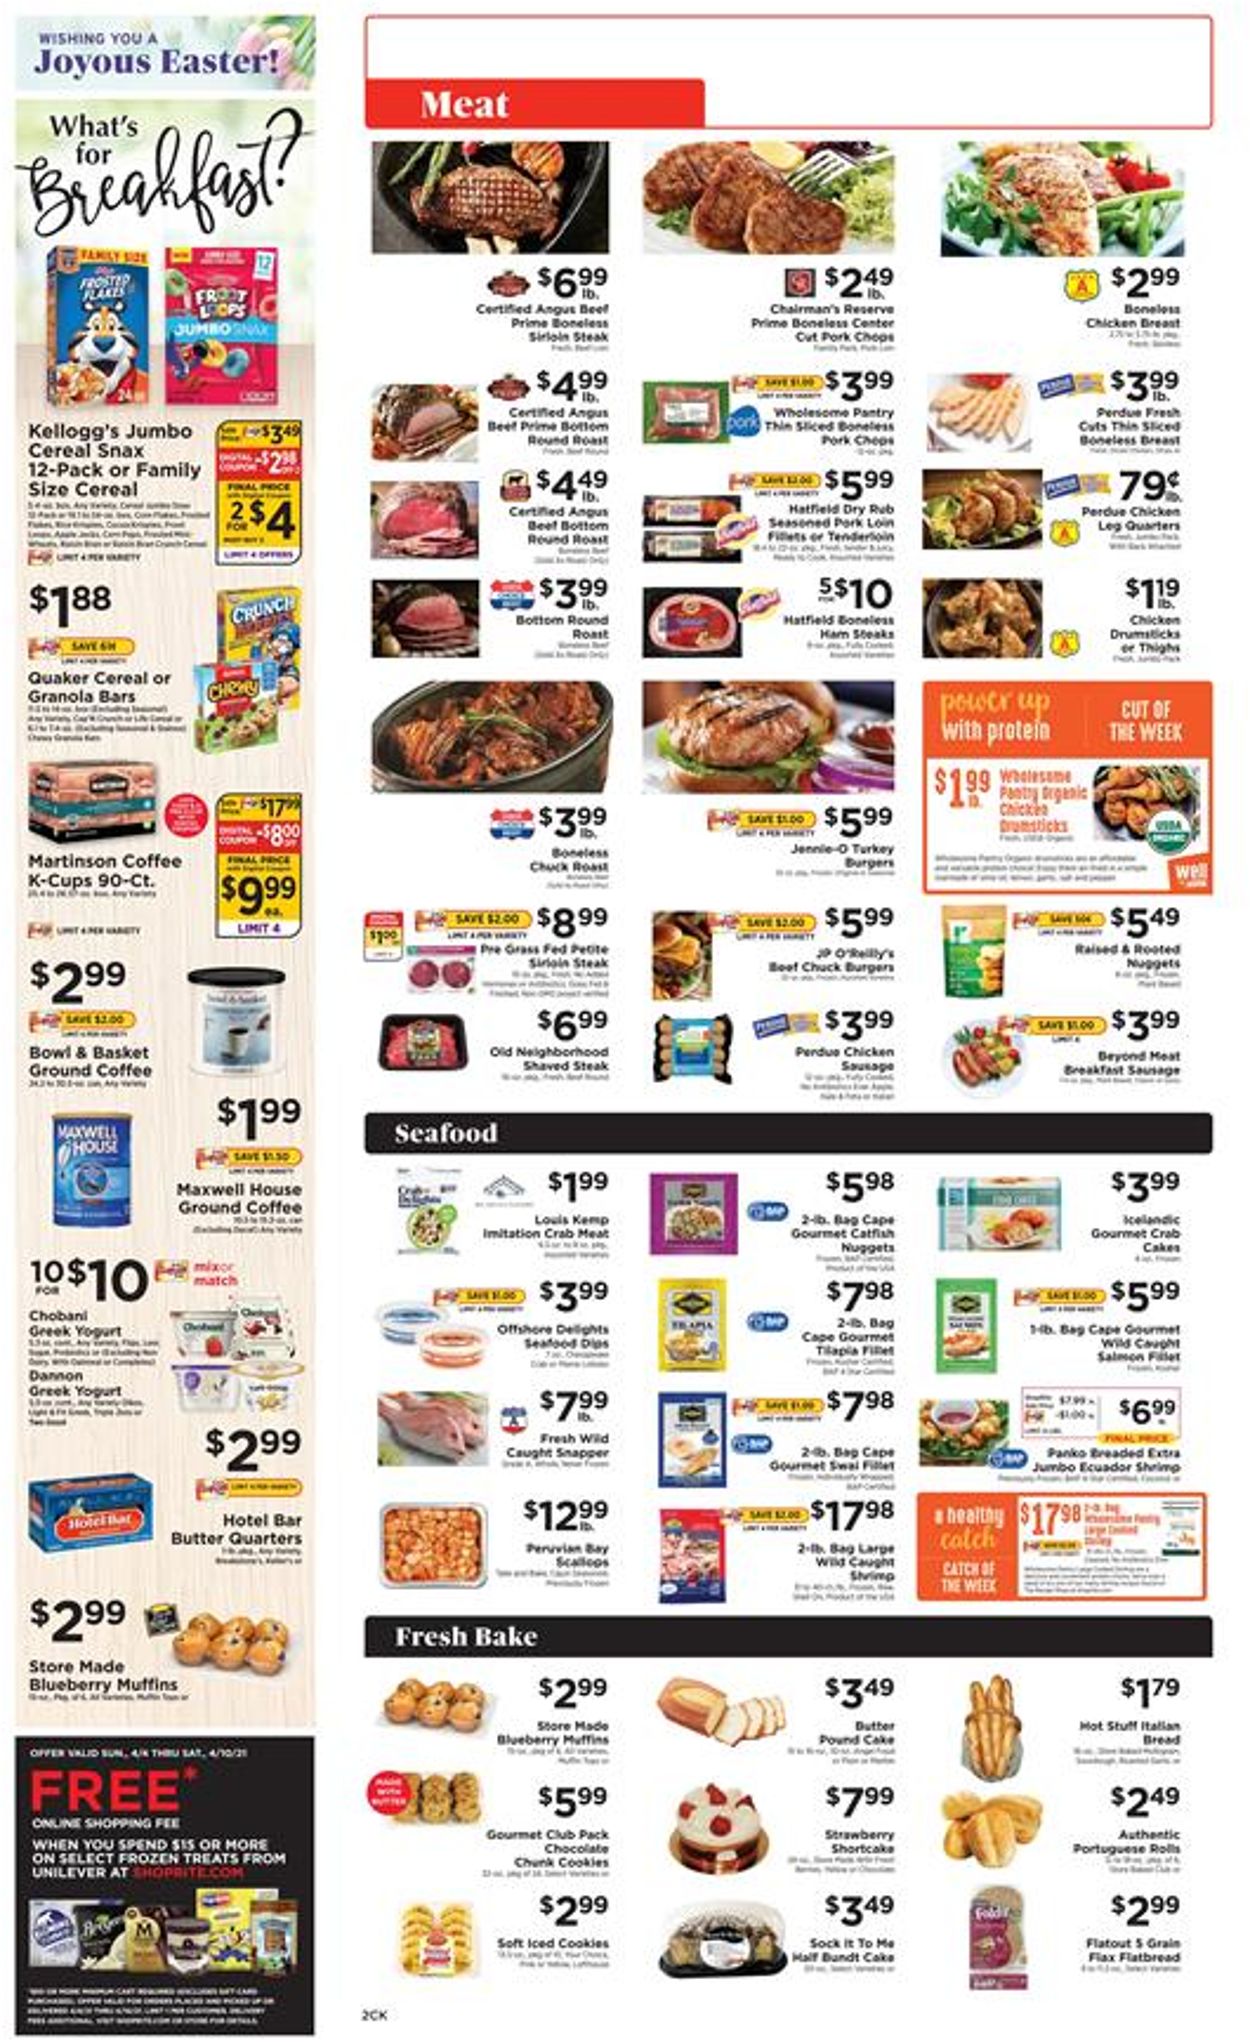 ShopRite Current weekly ad 04/04 - 04/10/2021 [2] - frequent-ads.com